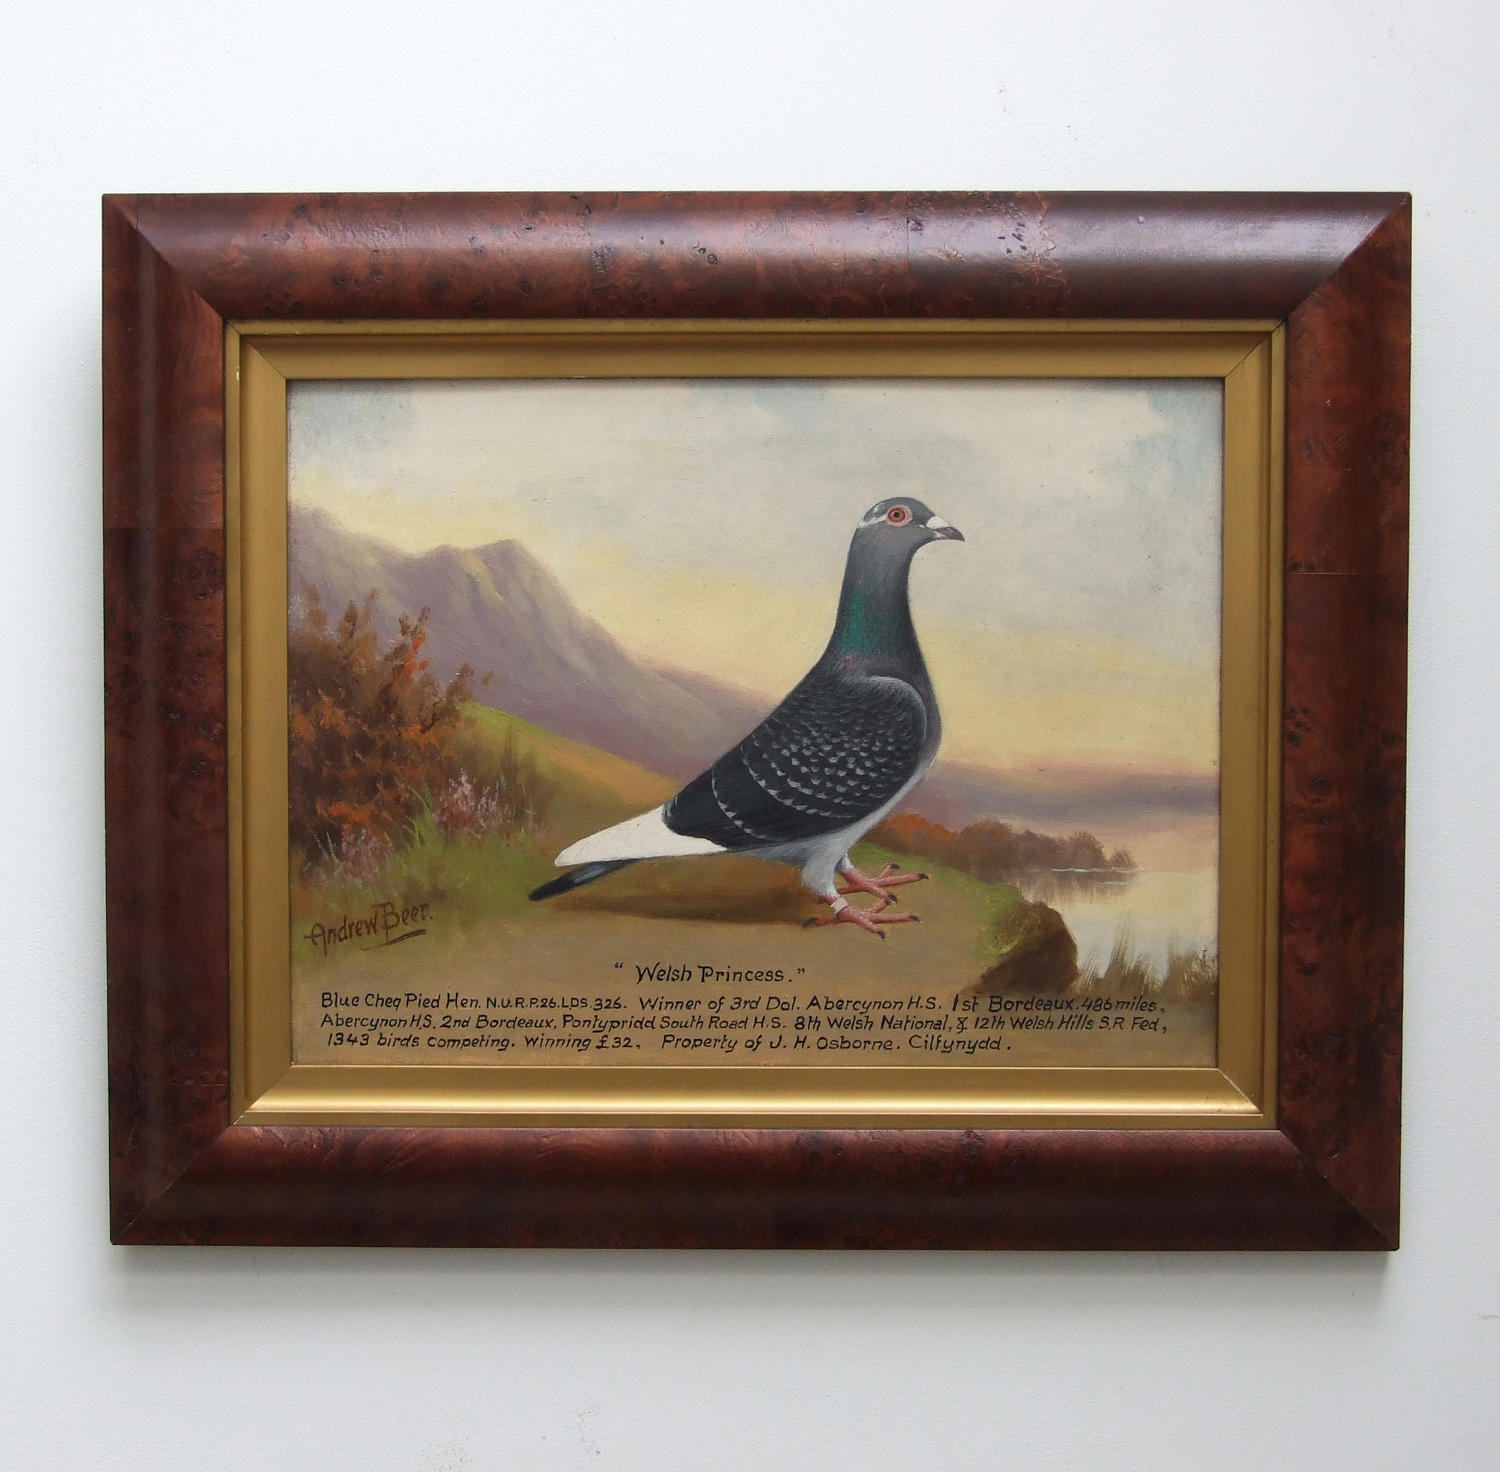 Oil portrait of pigeon by Andrew Beer